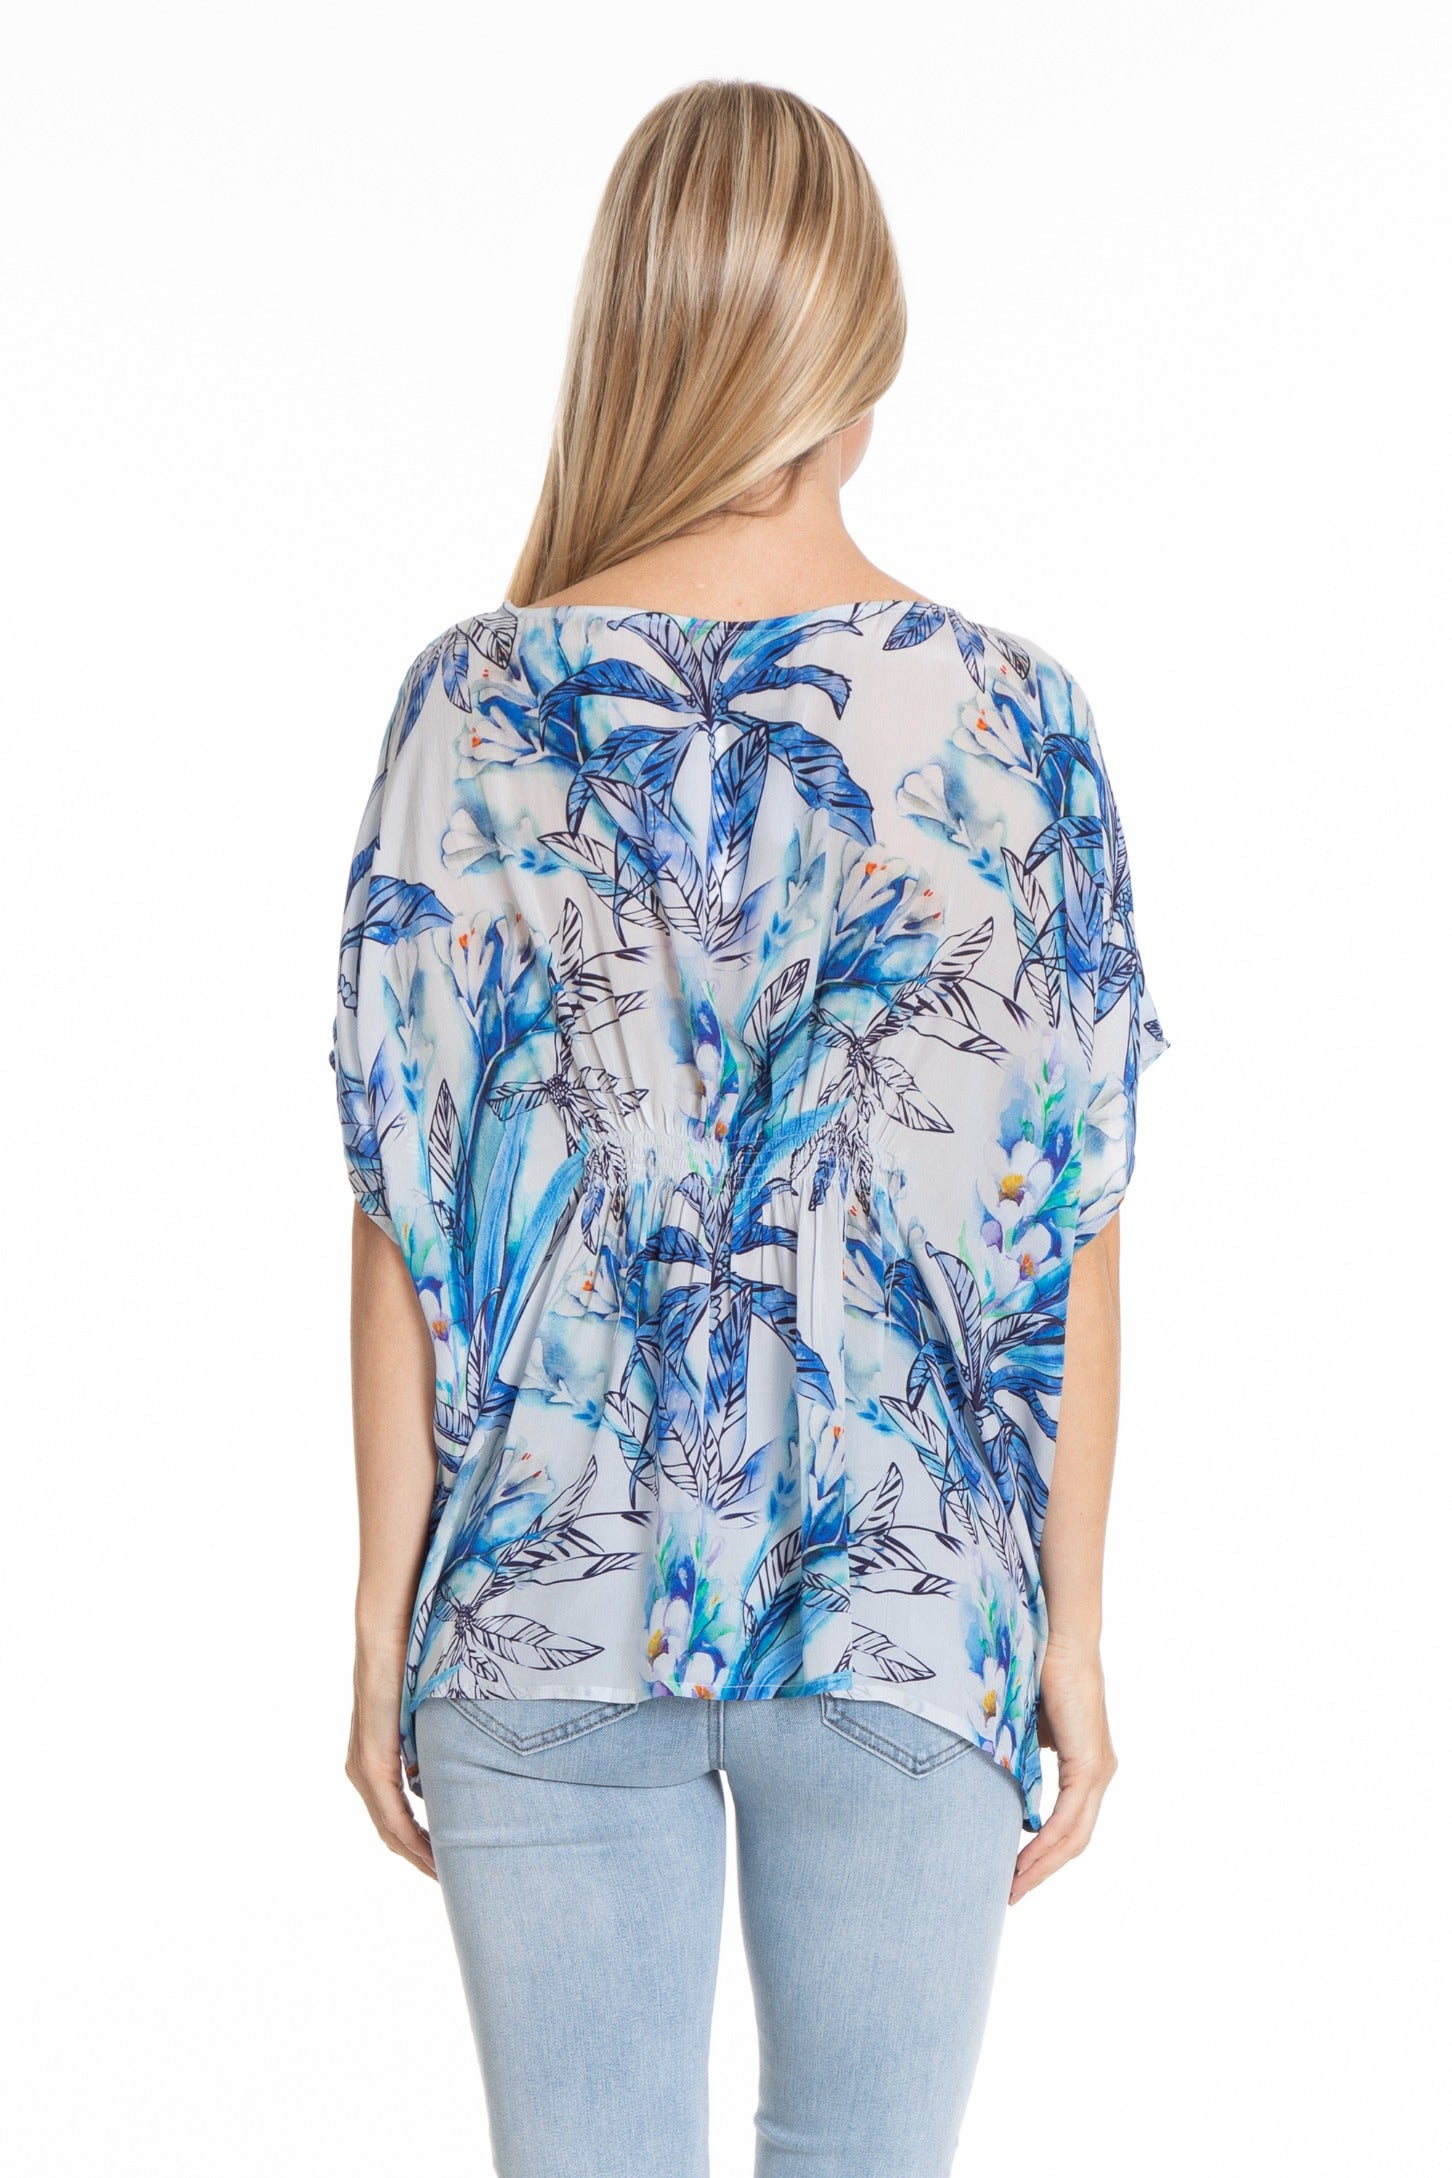 Island Paradise Print - Pullover Poncho with Ruching Top Back APNY